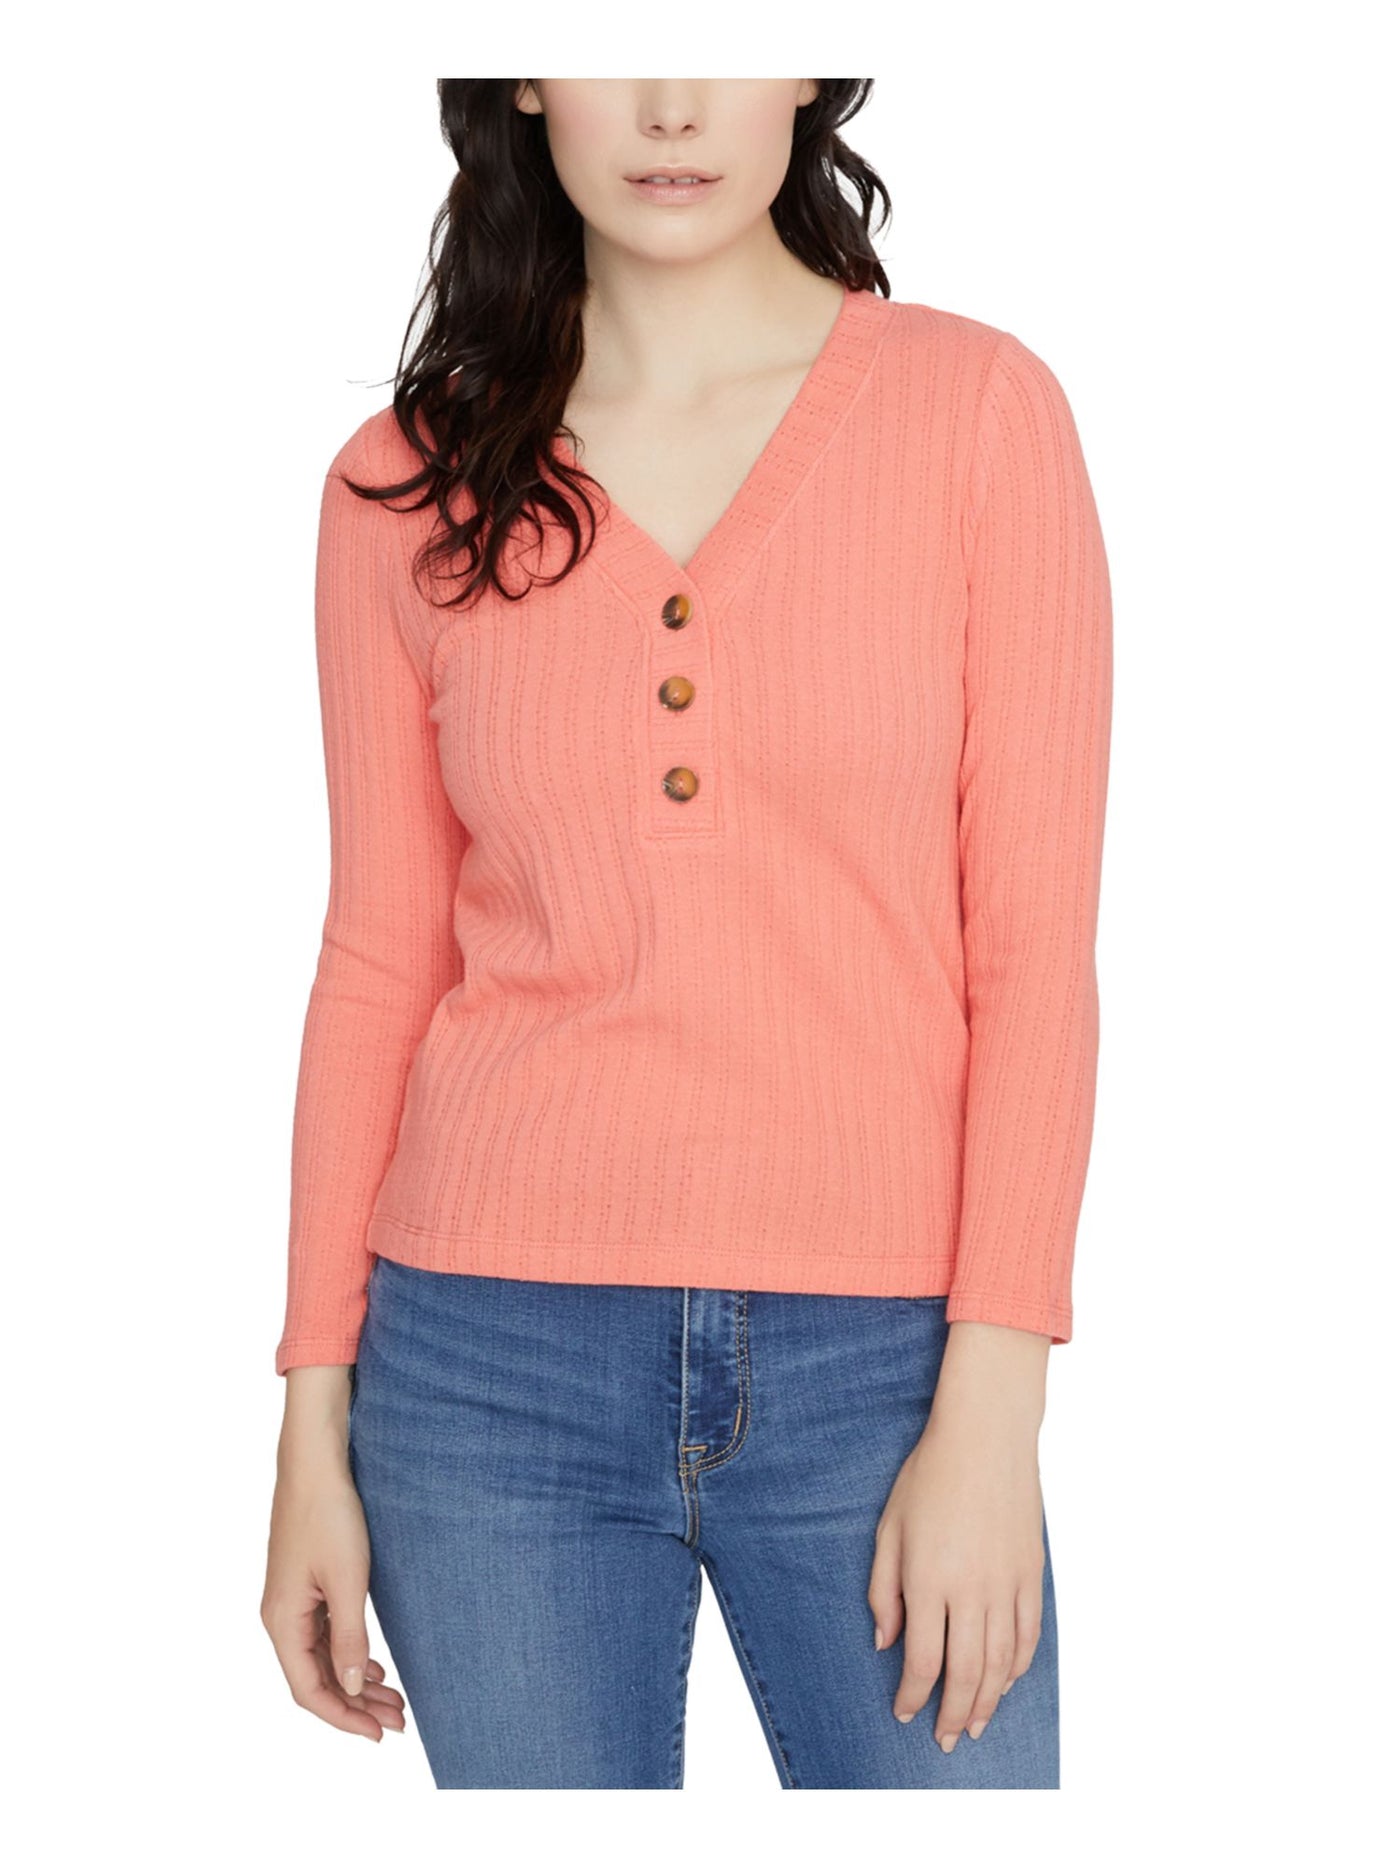 SANCTUARY Womens Coral 3/4 Sleeve With Buttons Sweater L